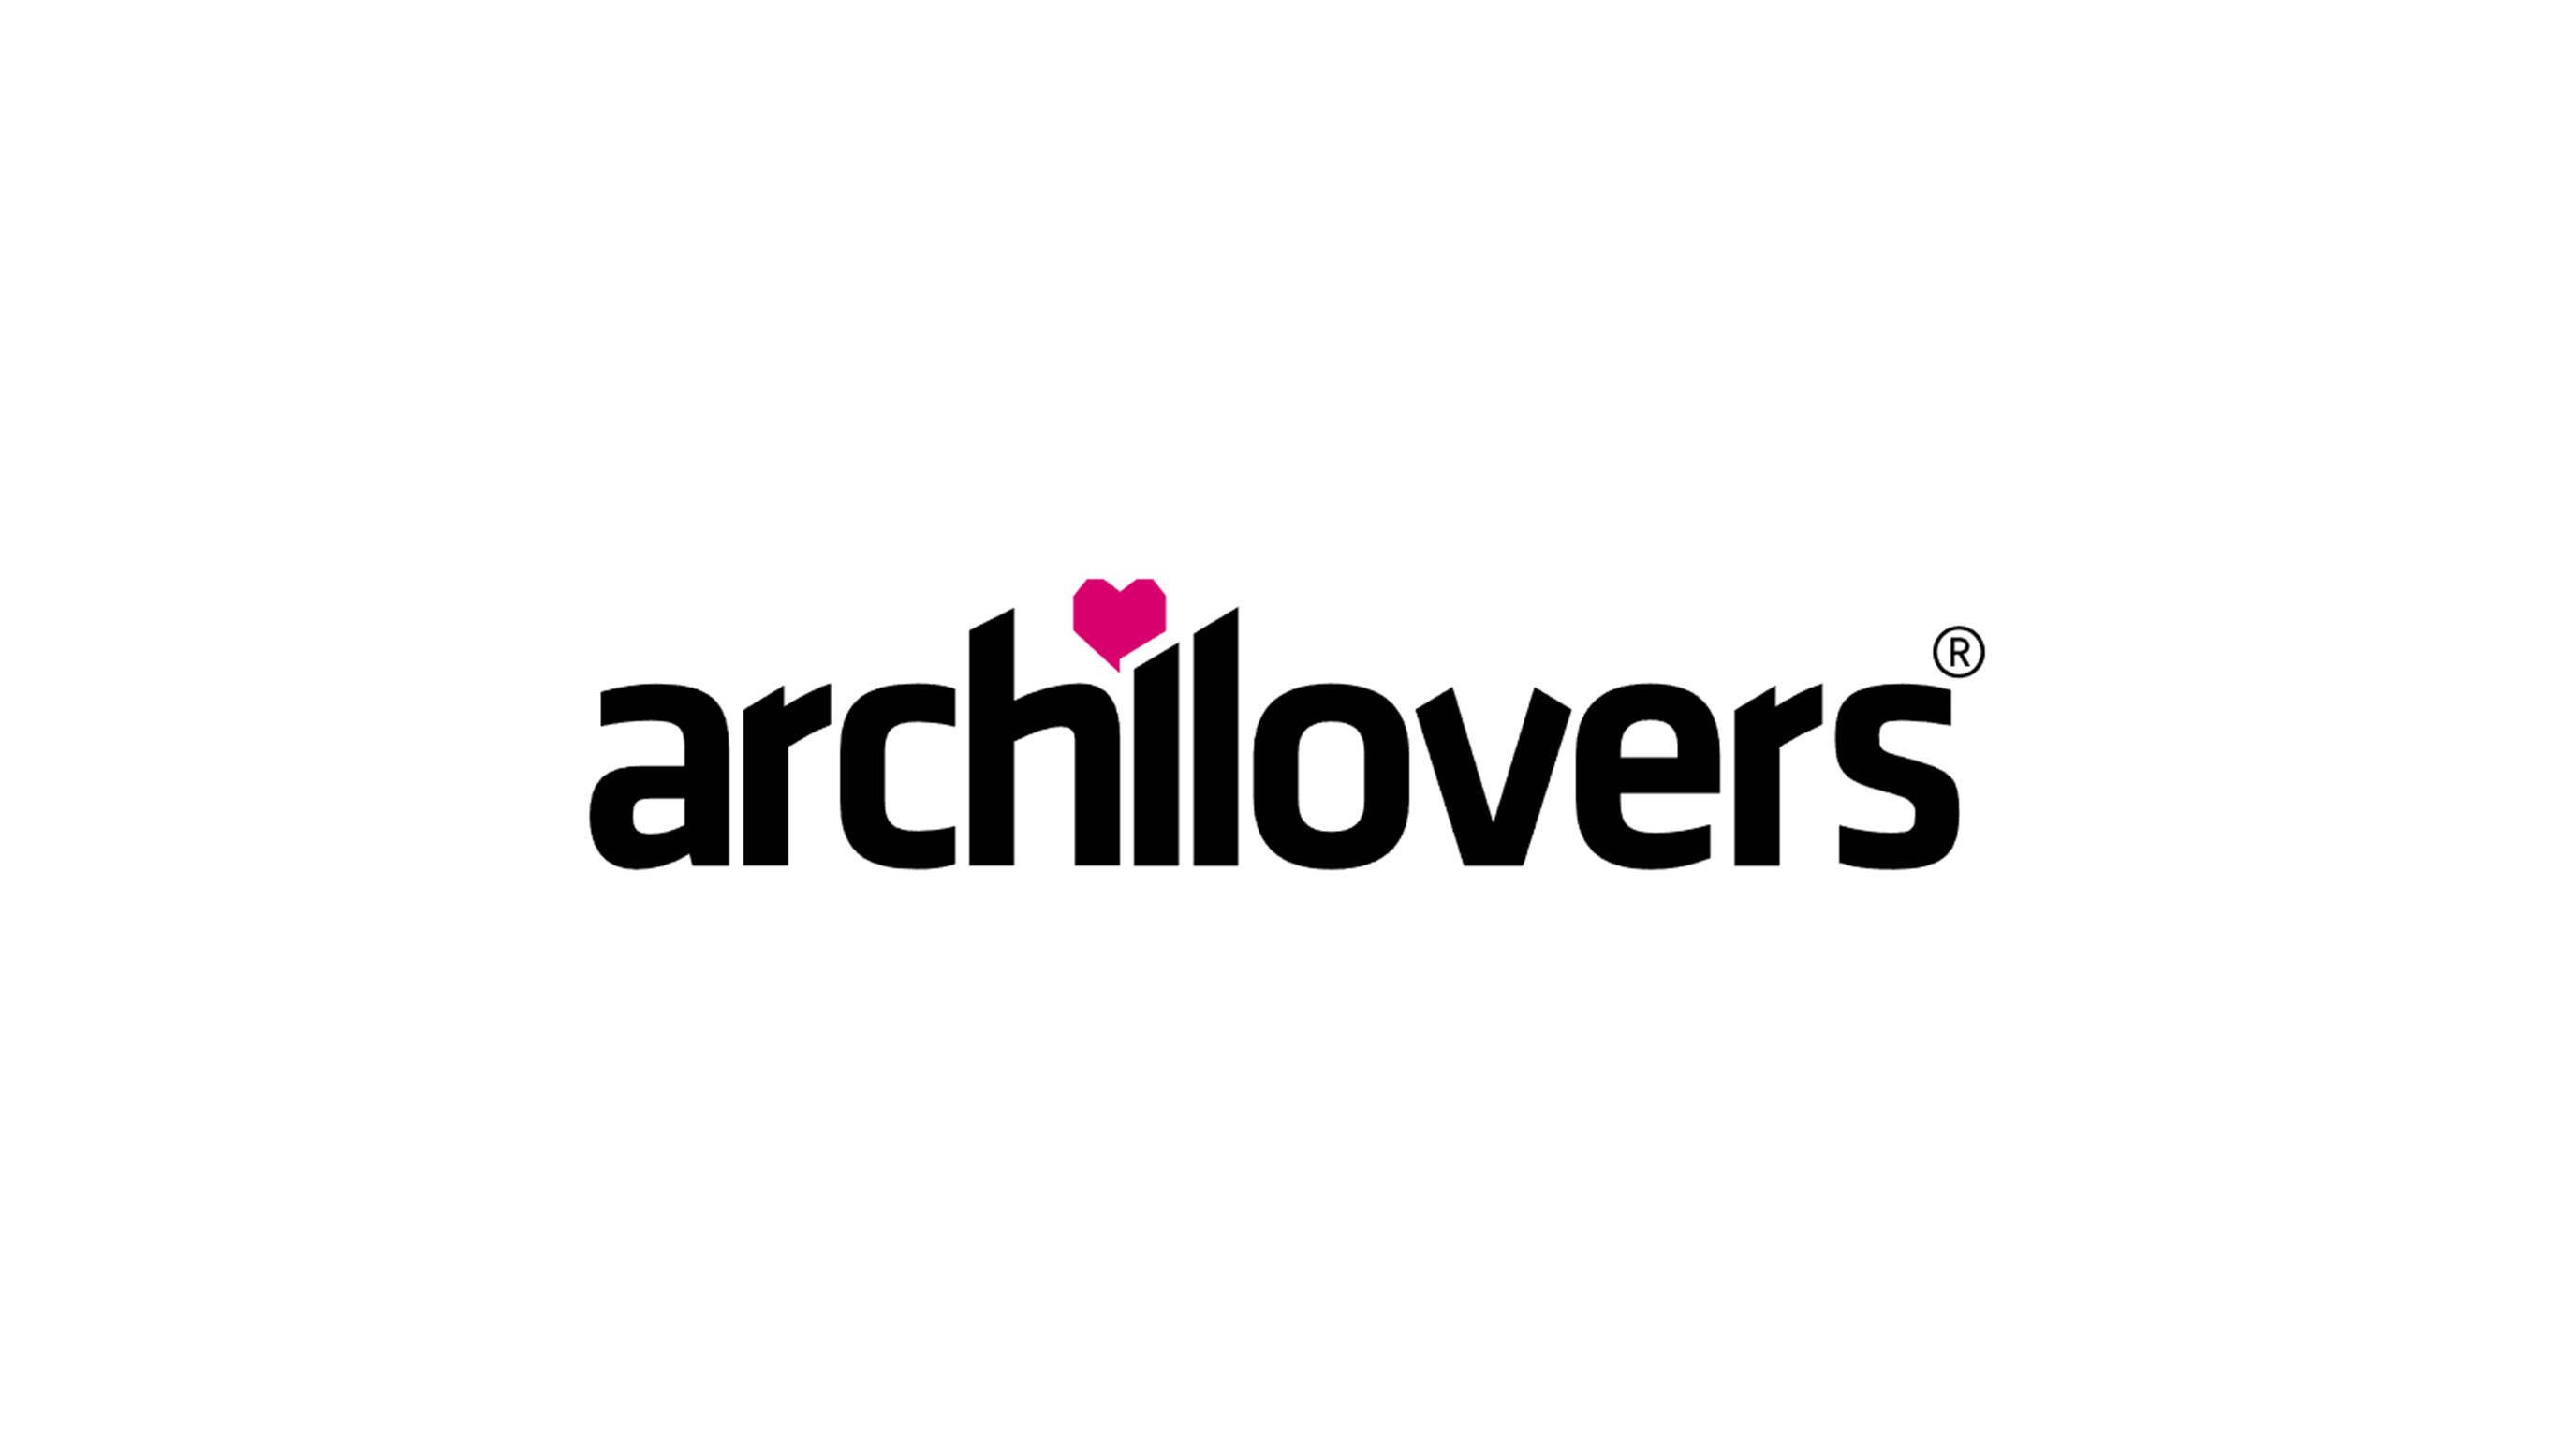 archilovers